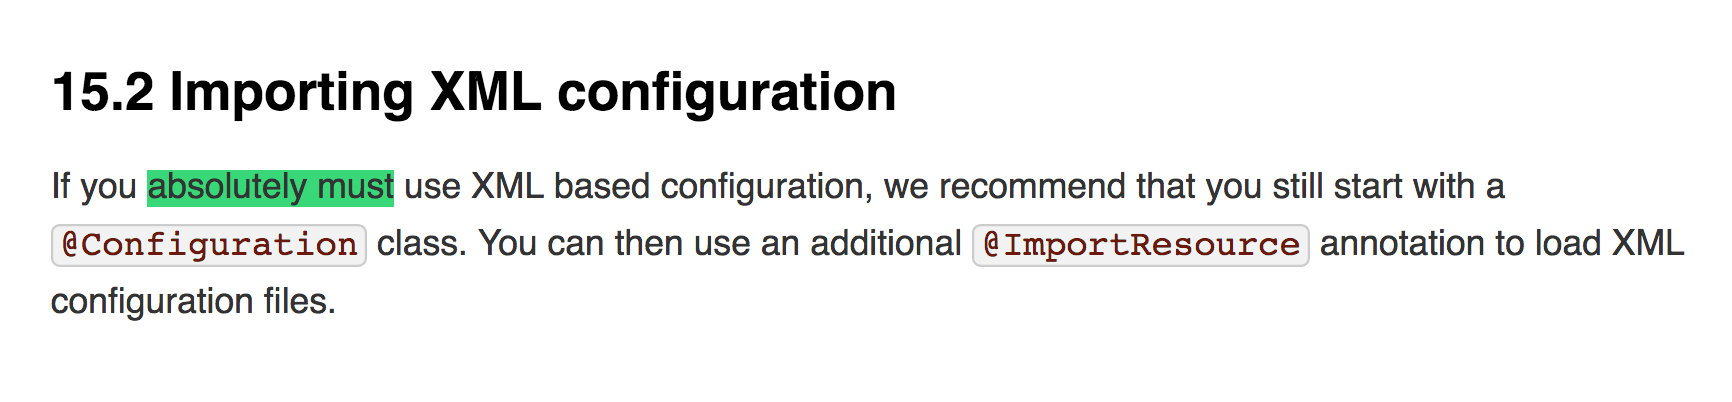 If you must - screengrab from Spring documentation